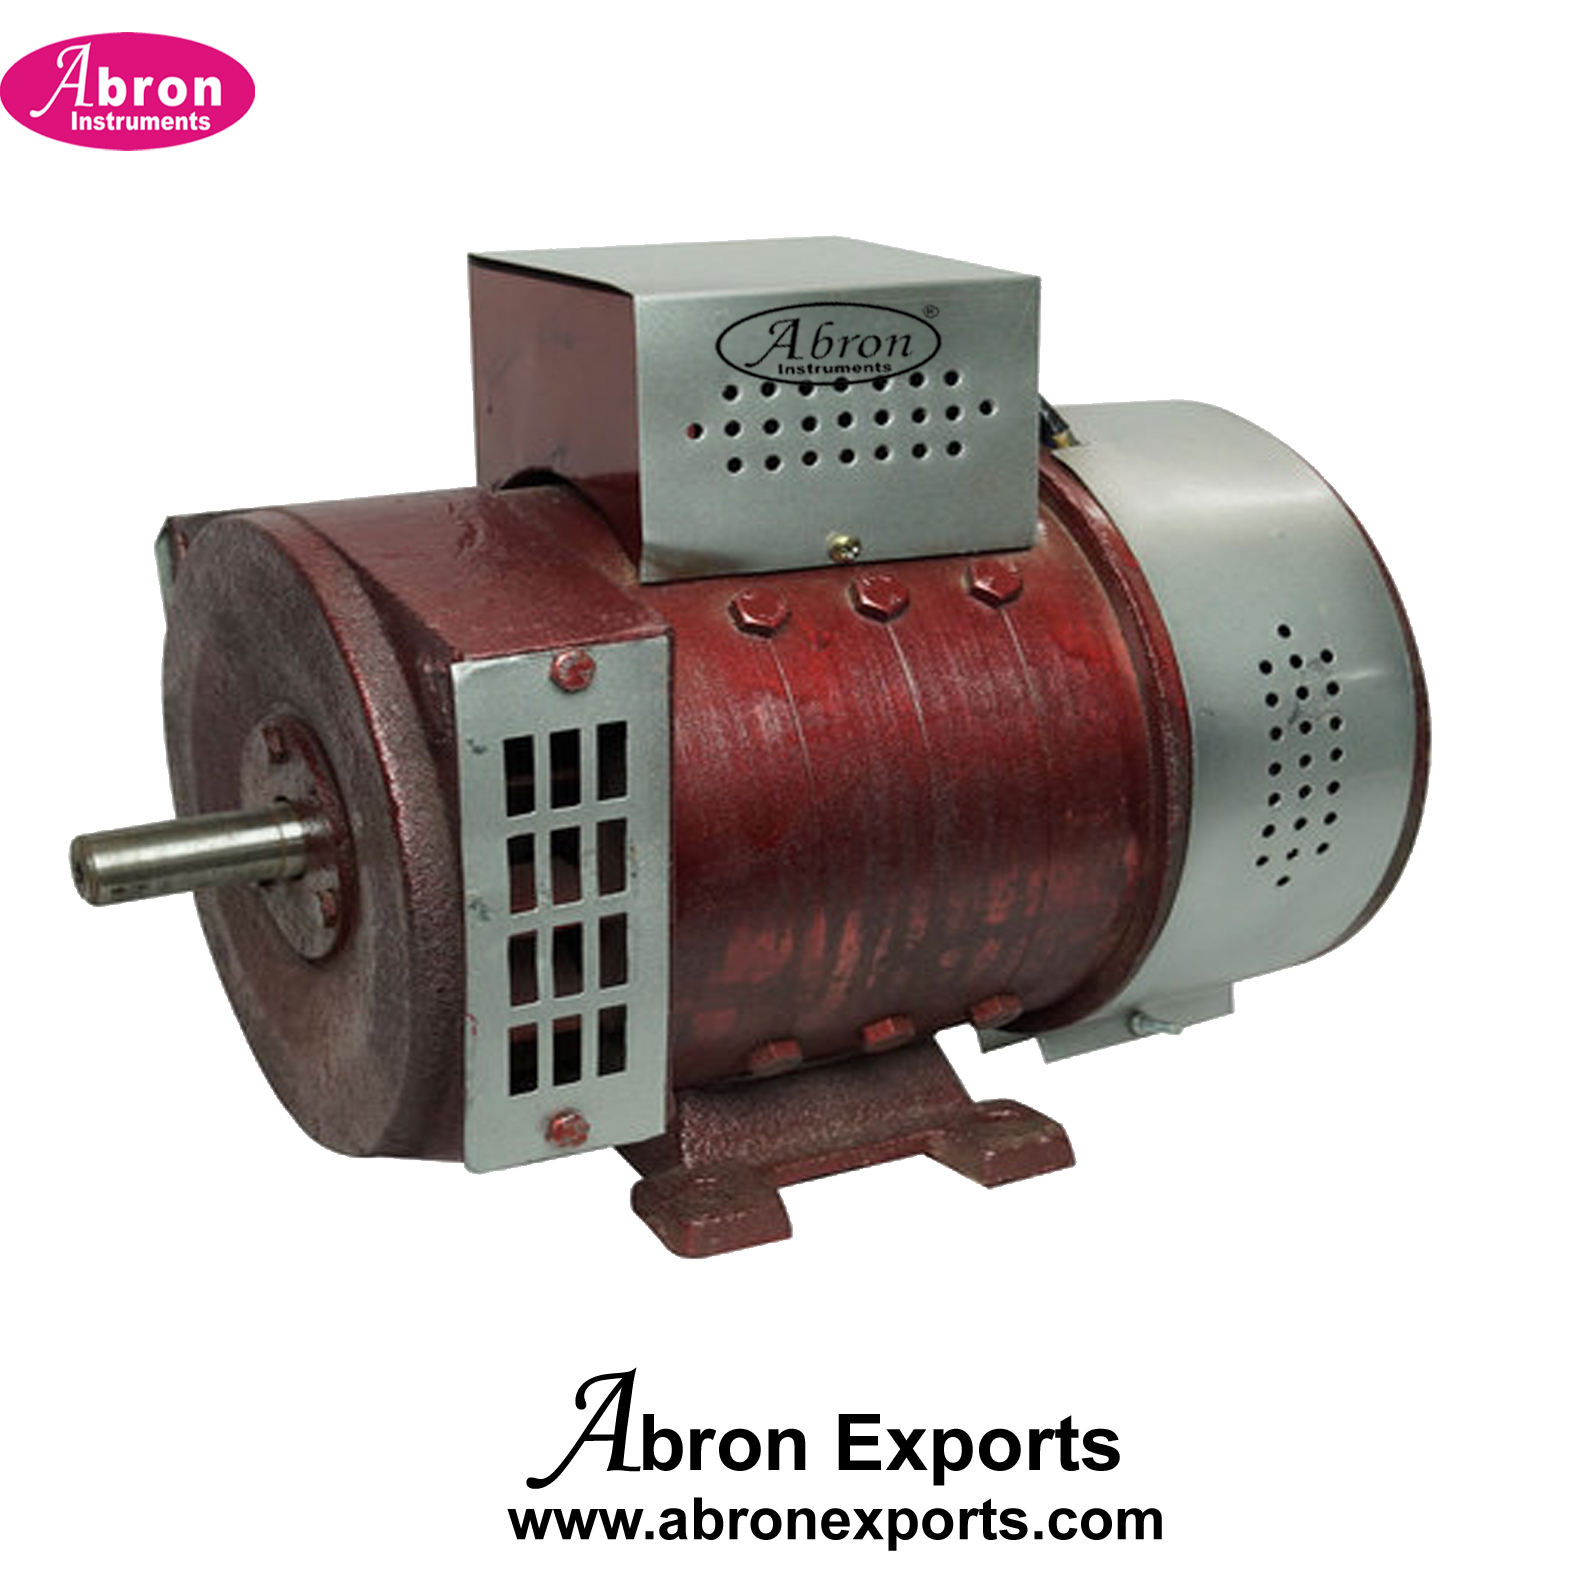 Motor Synchronous Motor 1500 RPM  Abron AE -8466MS 